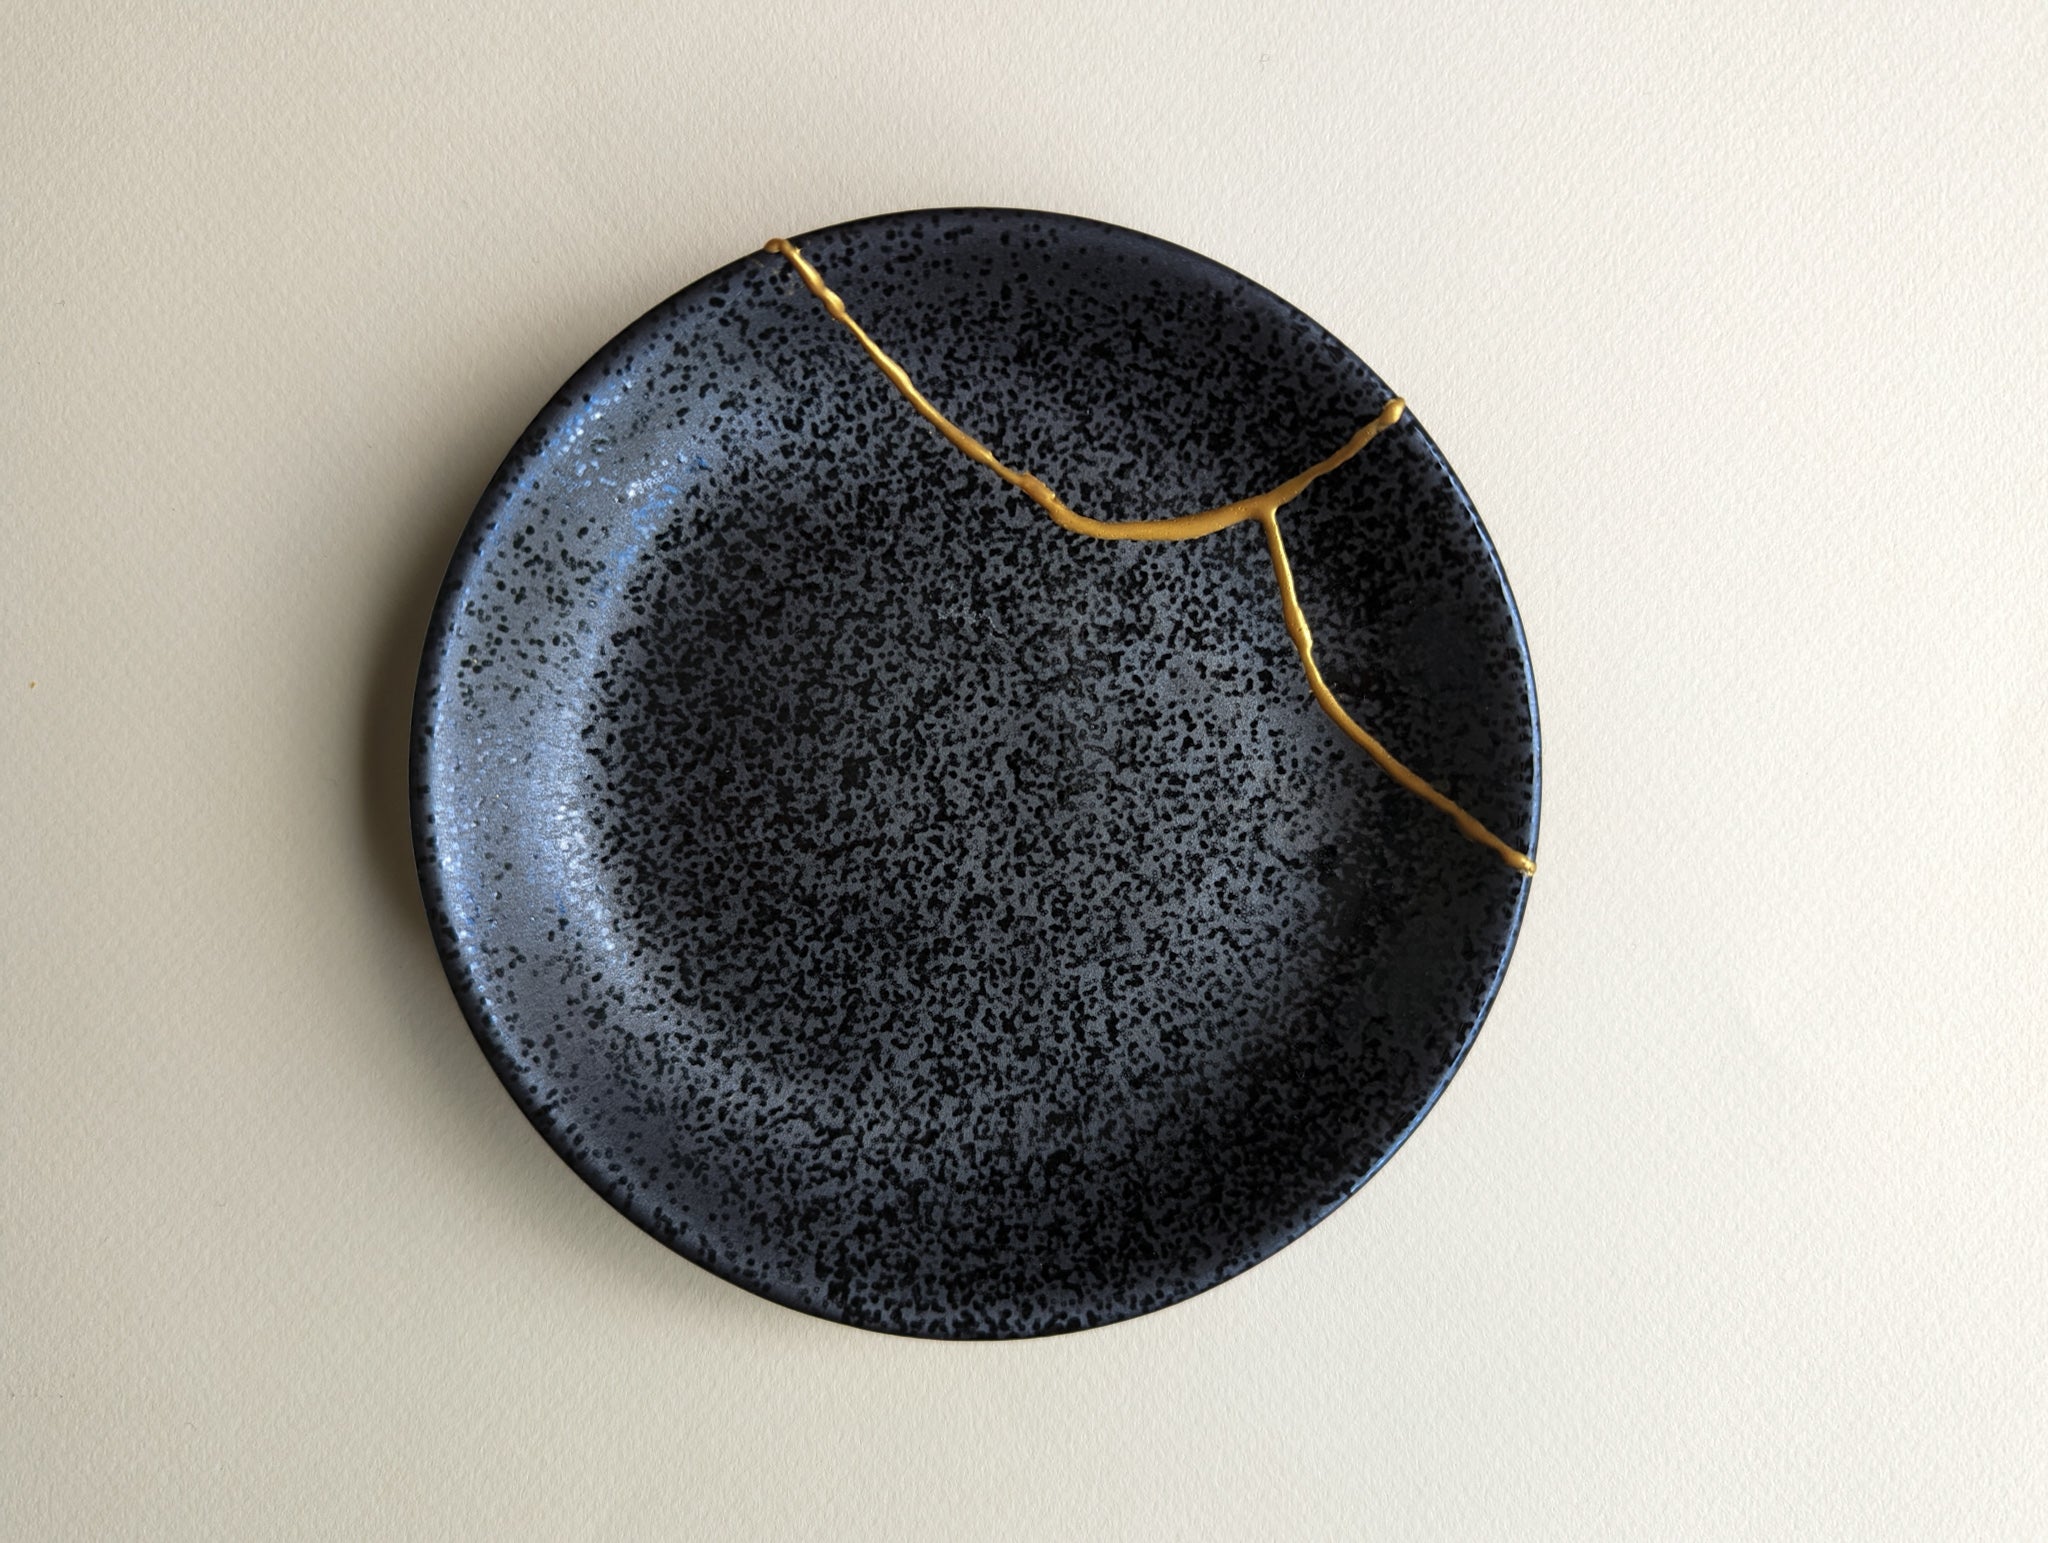 small black saucer repaired using mended with gold kintsugi ceramic repair kit